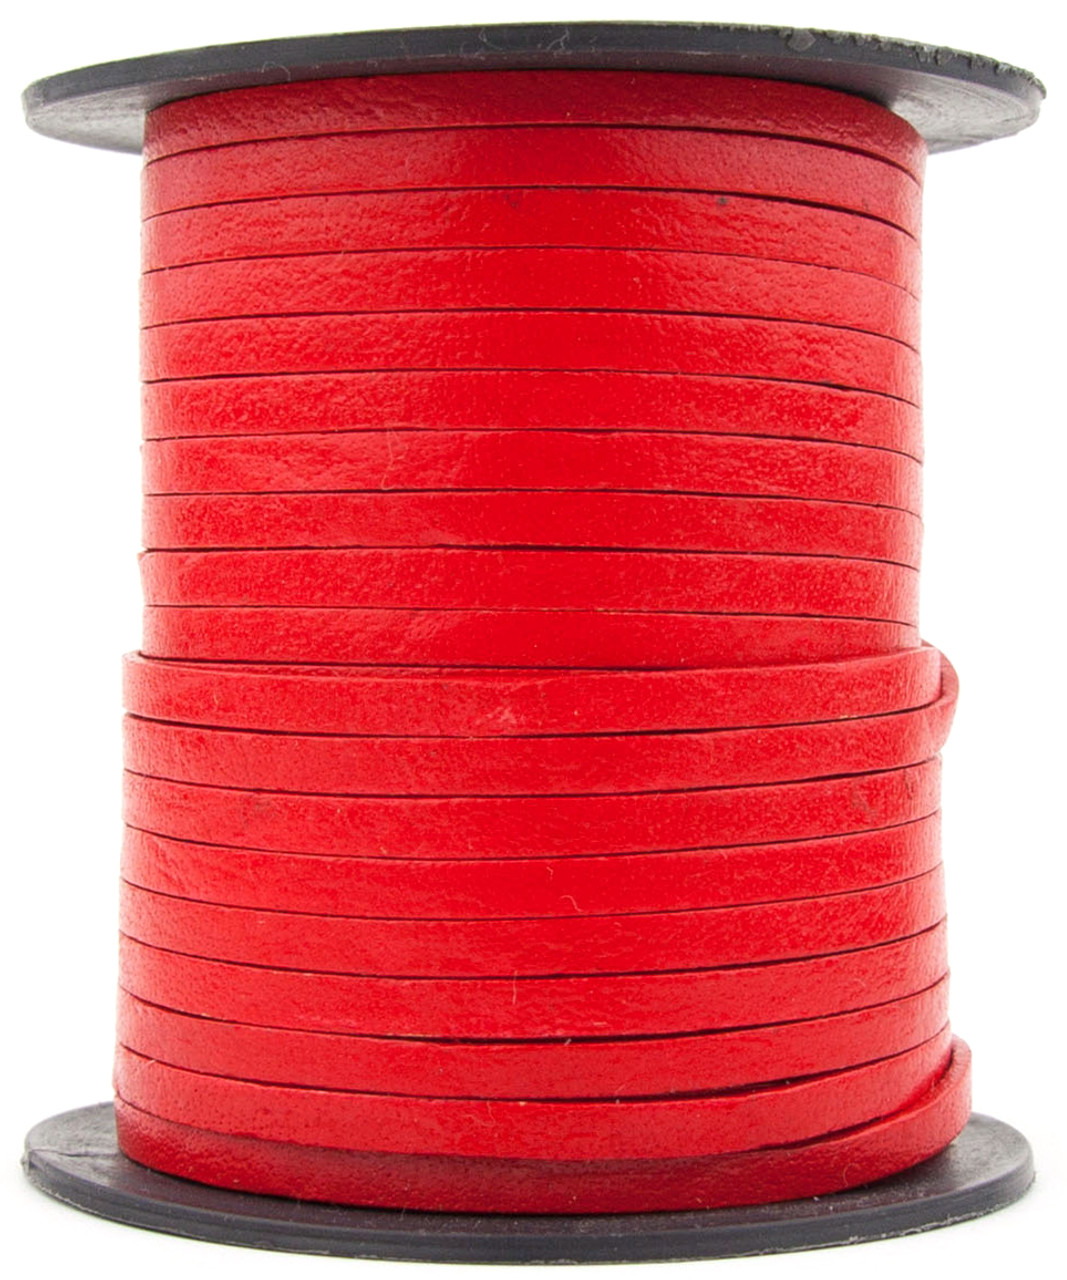 Xsotica Red Flat Leather Cord 3mm x 1mm - 1 Yard